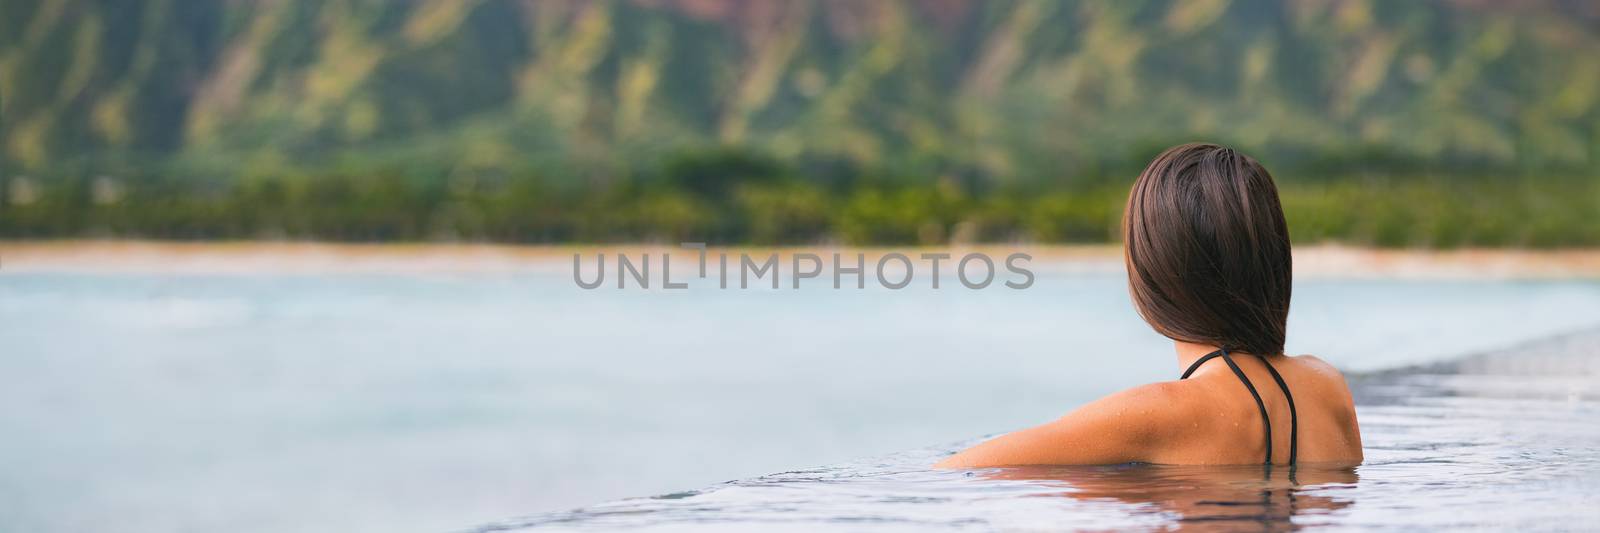 Luxury vacation woman travel tourist relaxing in infinity swimming pool on summer travel at tropical beach resort. girl alone on wellness spa relaxation outside in nature landscape banner panorama.